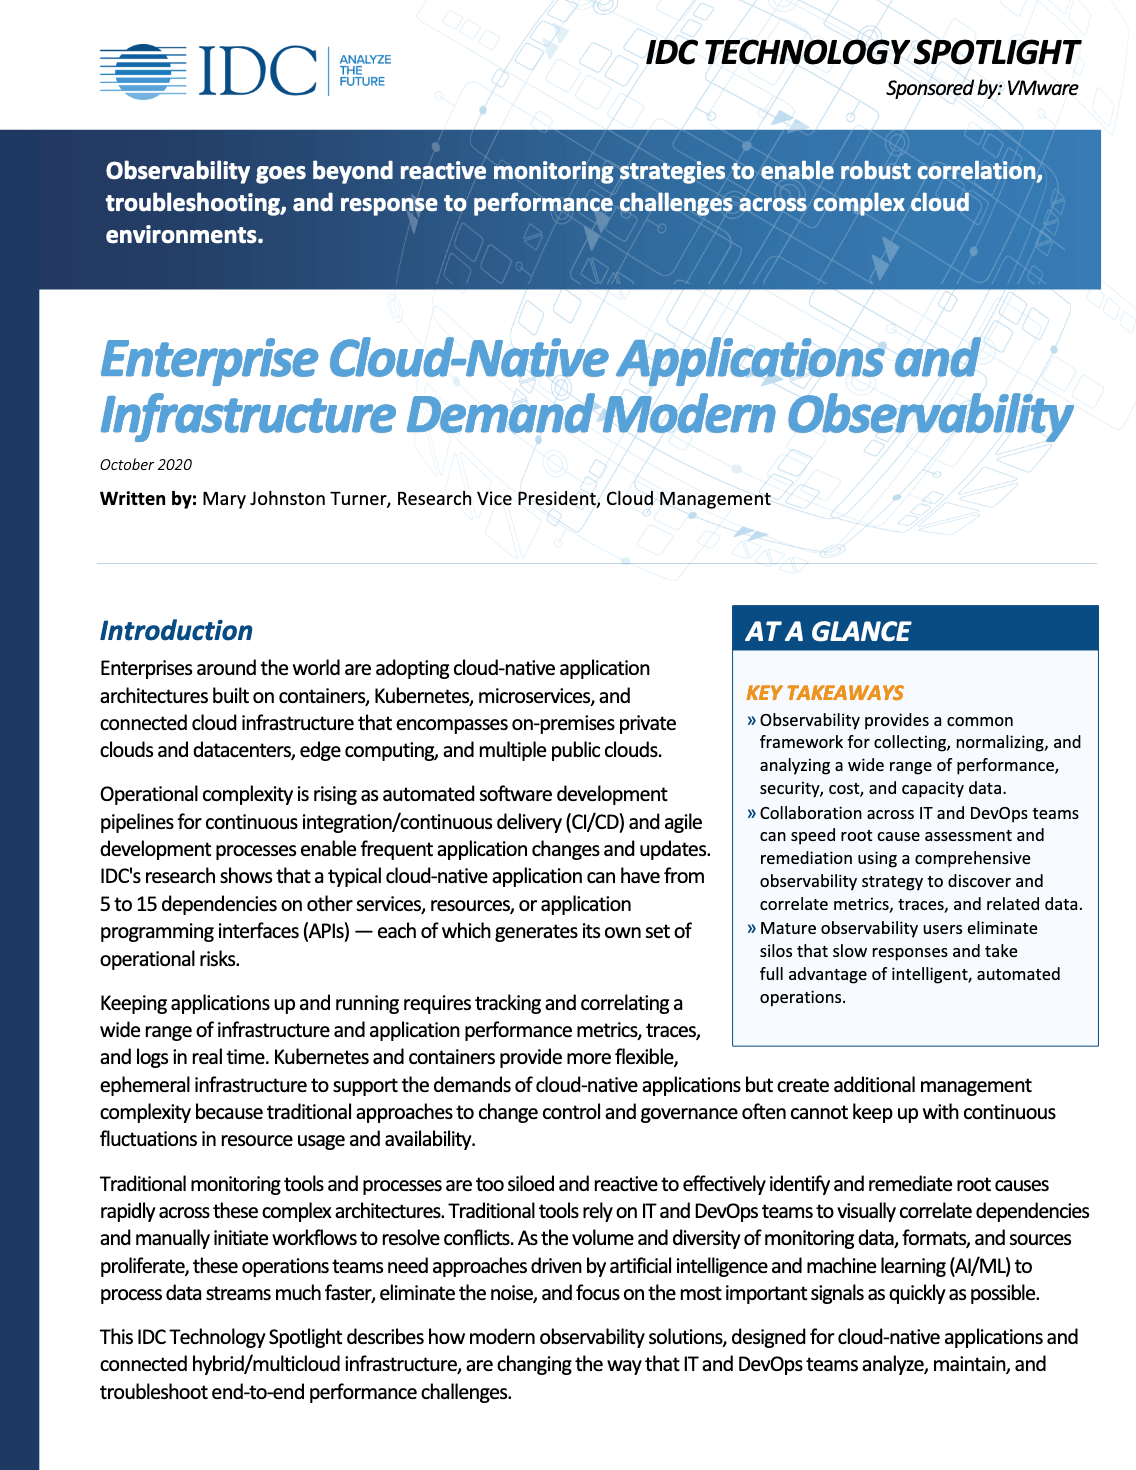 Enterprise Cloud Native - Enterprise Cloud Native Apps and Infrastructure Demand Modern Observability